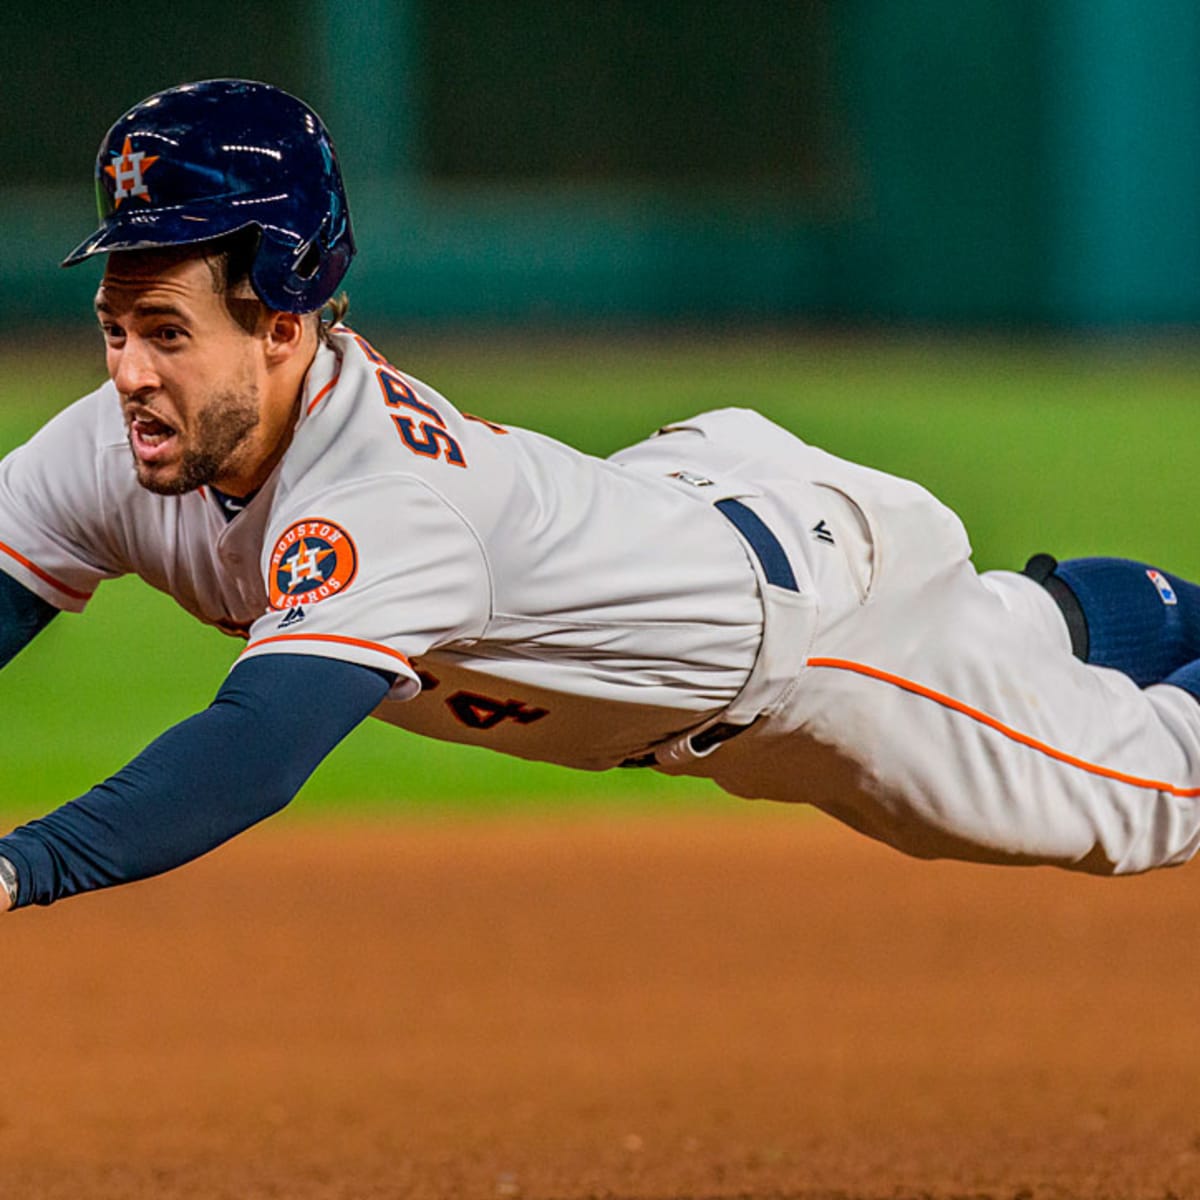 What's behind George Springer's return to form? It's all about the